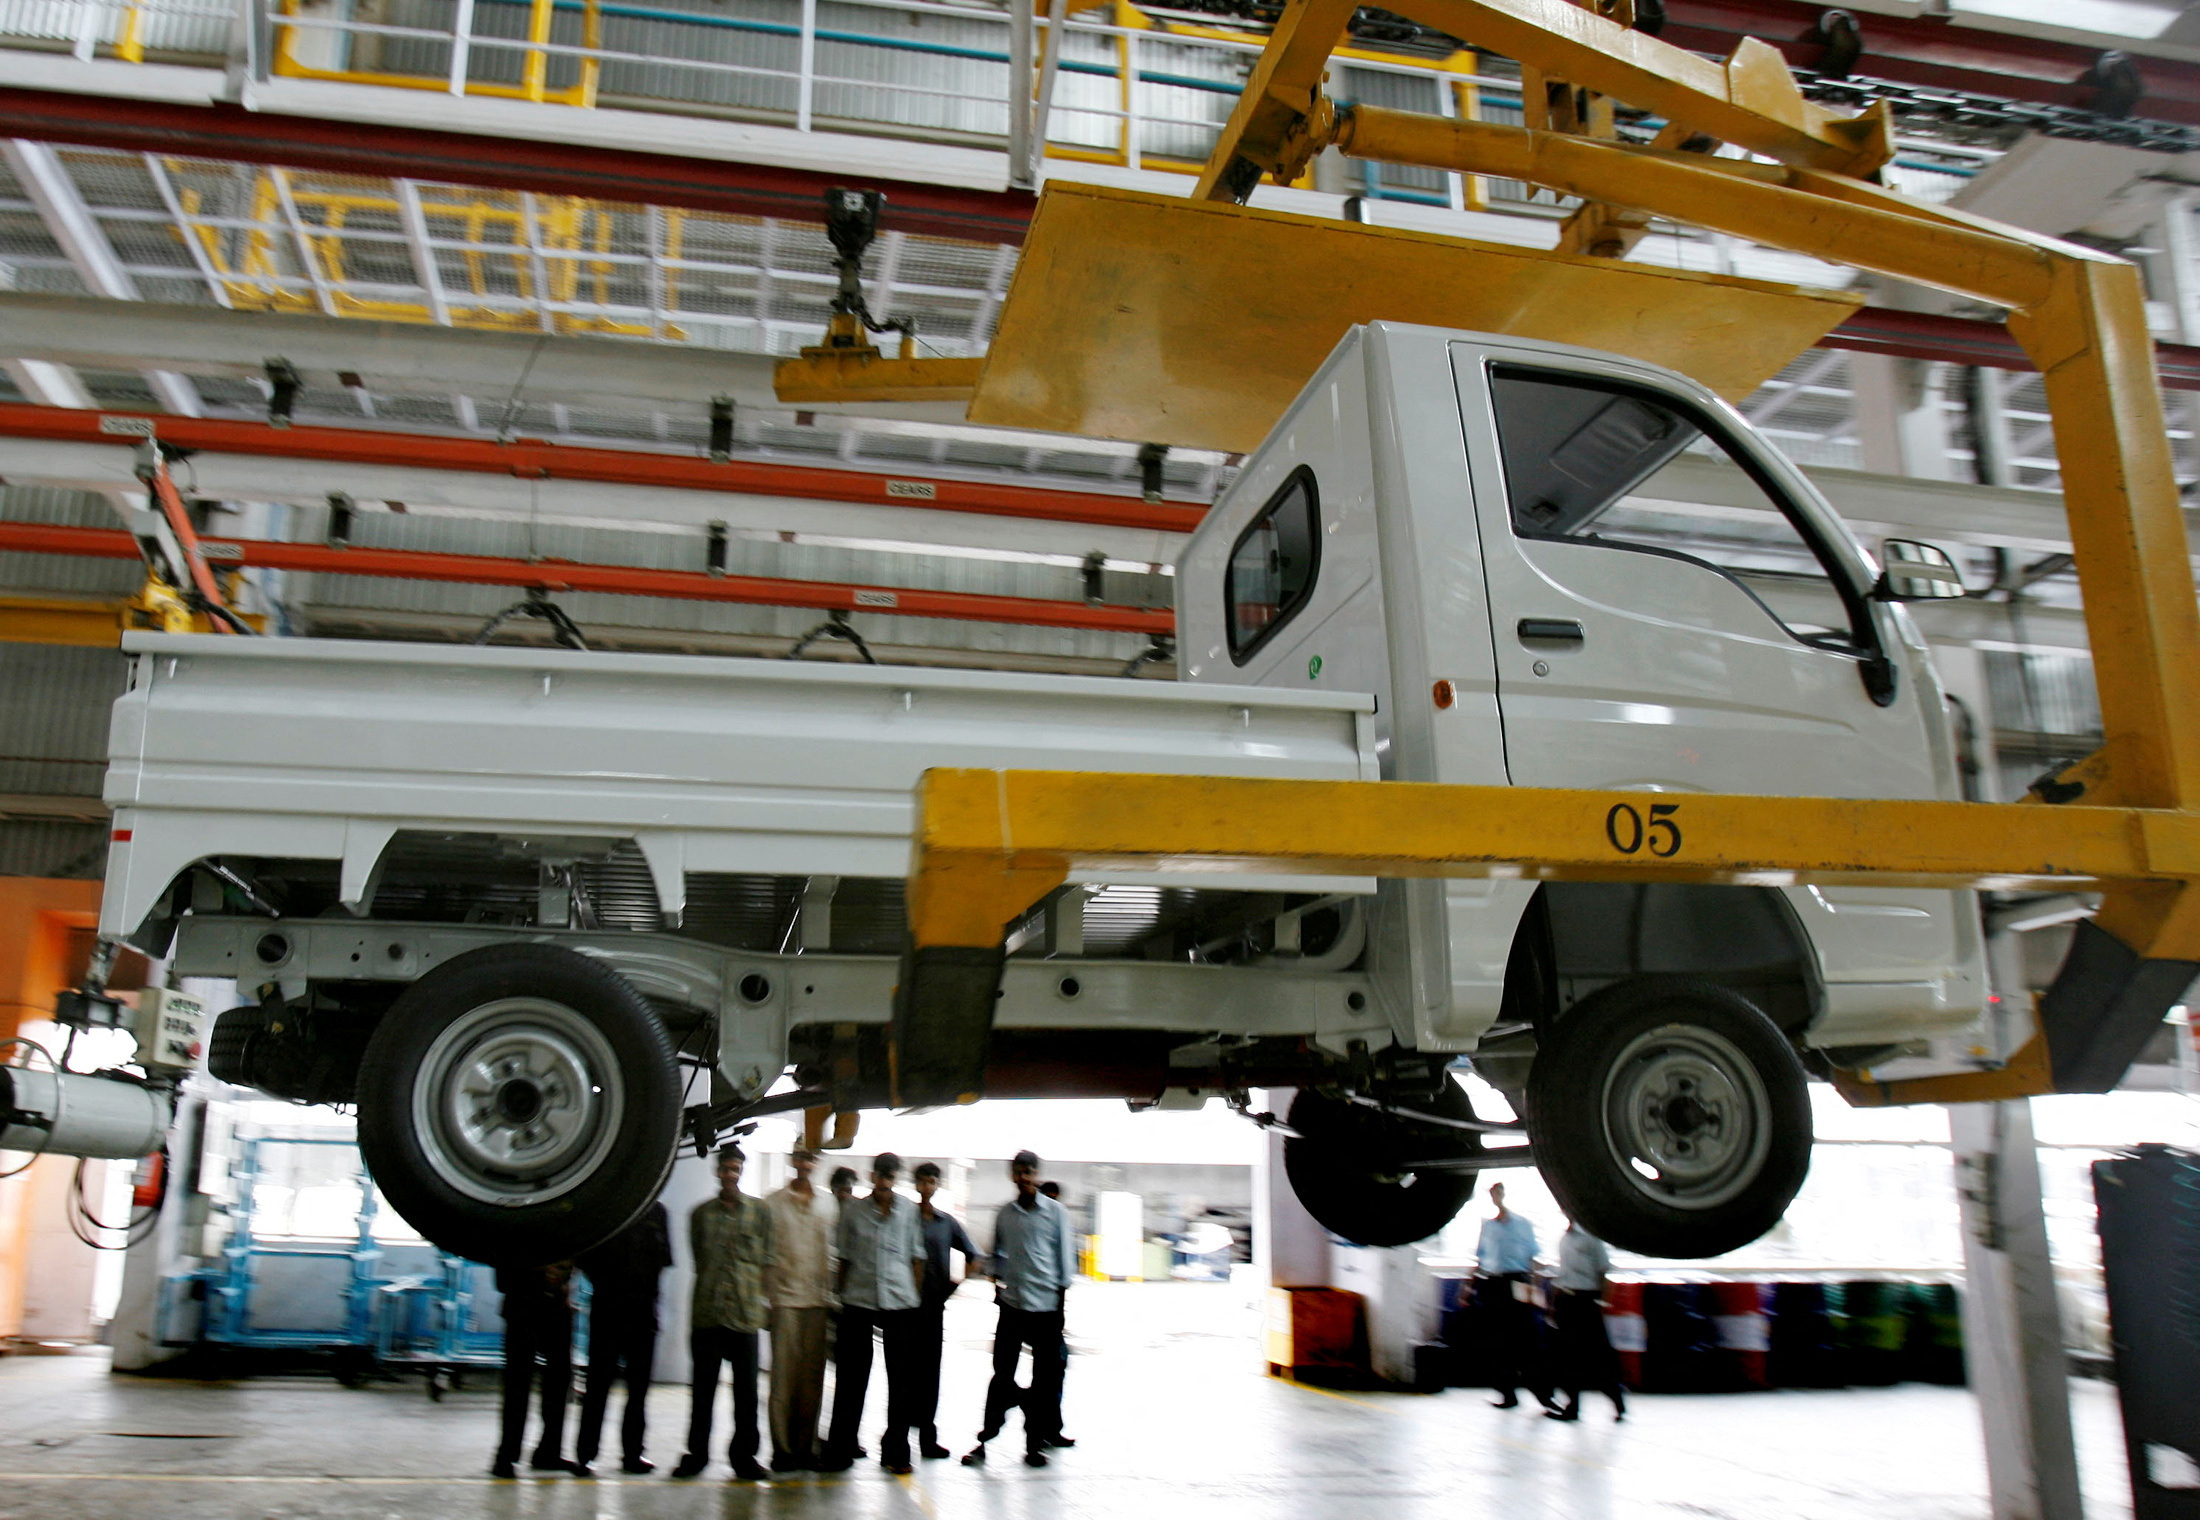 A new vehicle is seen on the assembly line at Tata Motors' plant in Pimpri